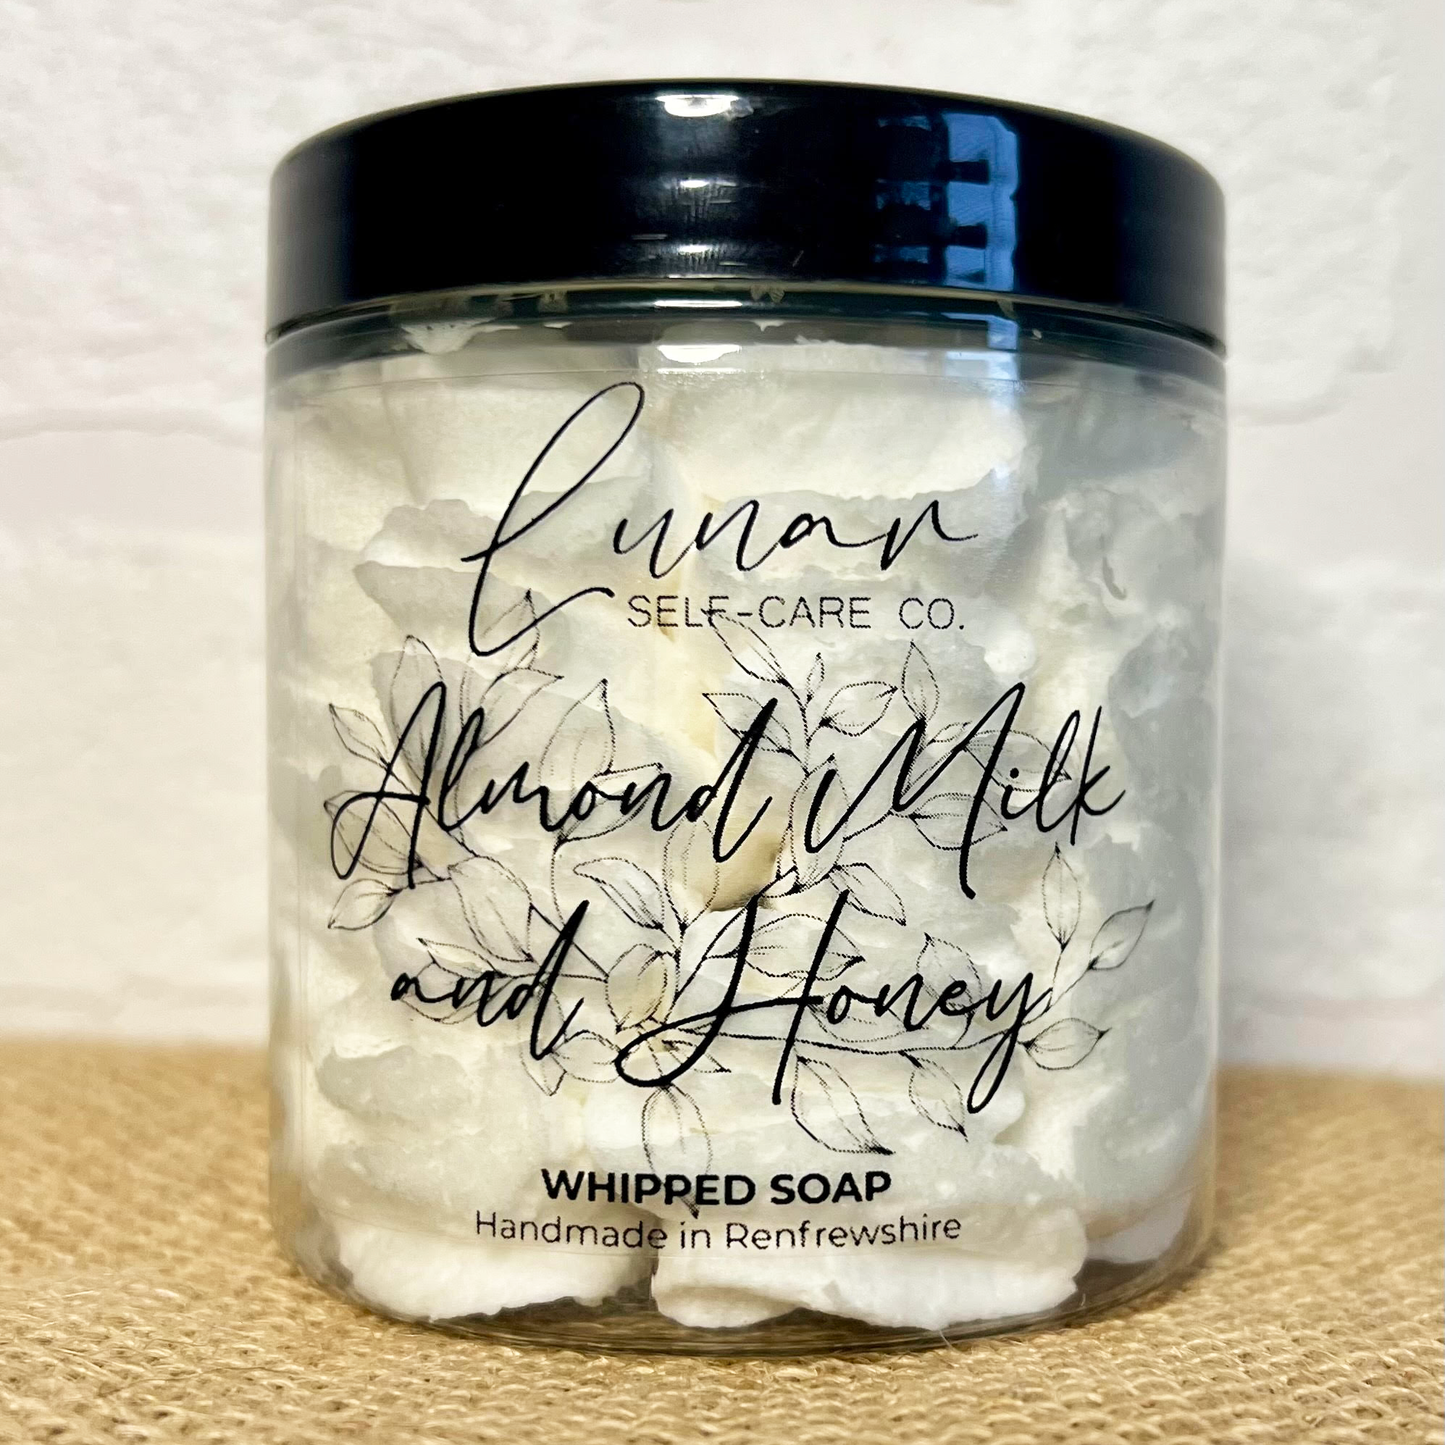 ALMOND MILK AND HONEY WHIPPED SOAP